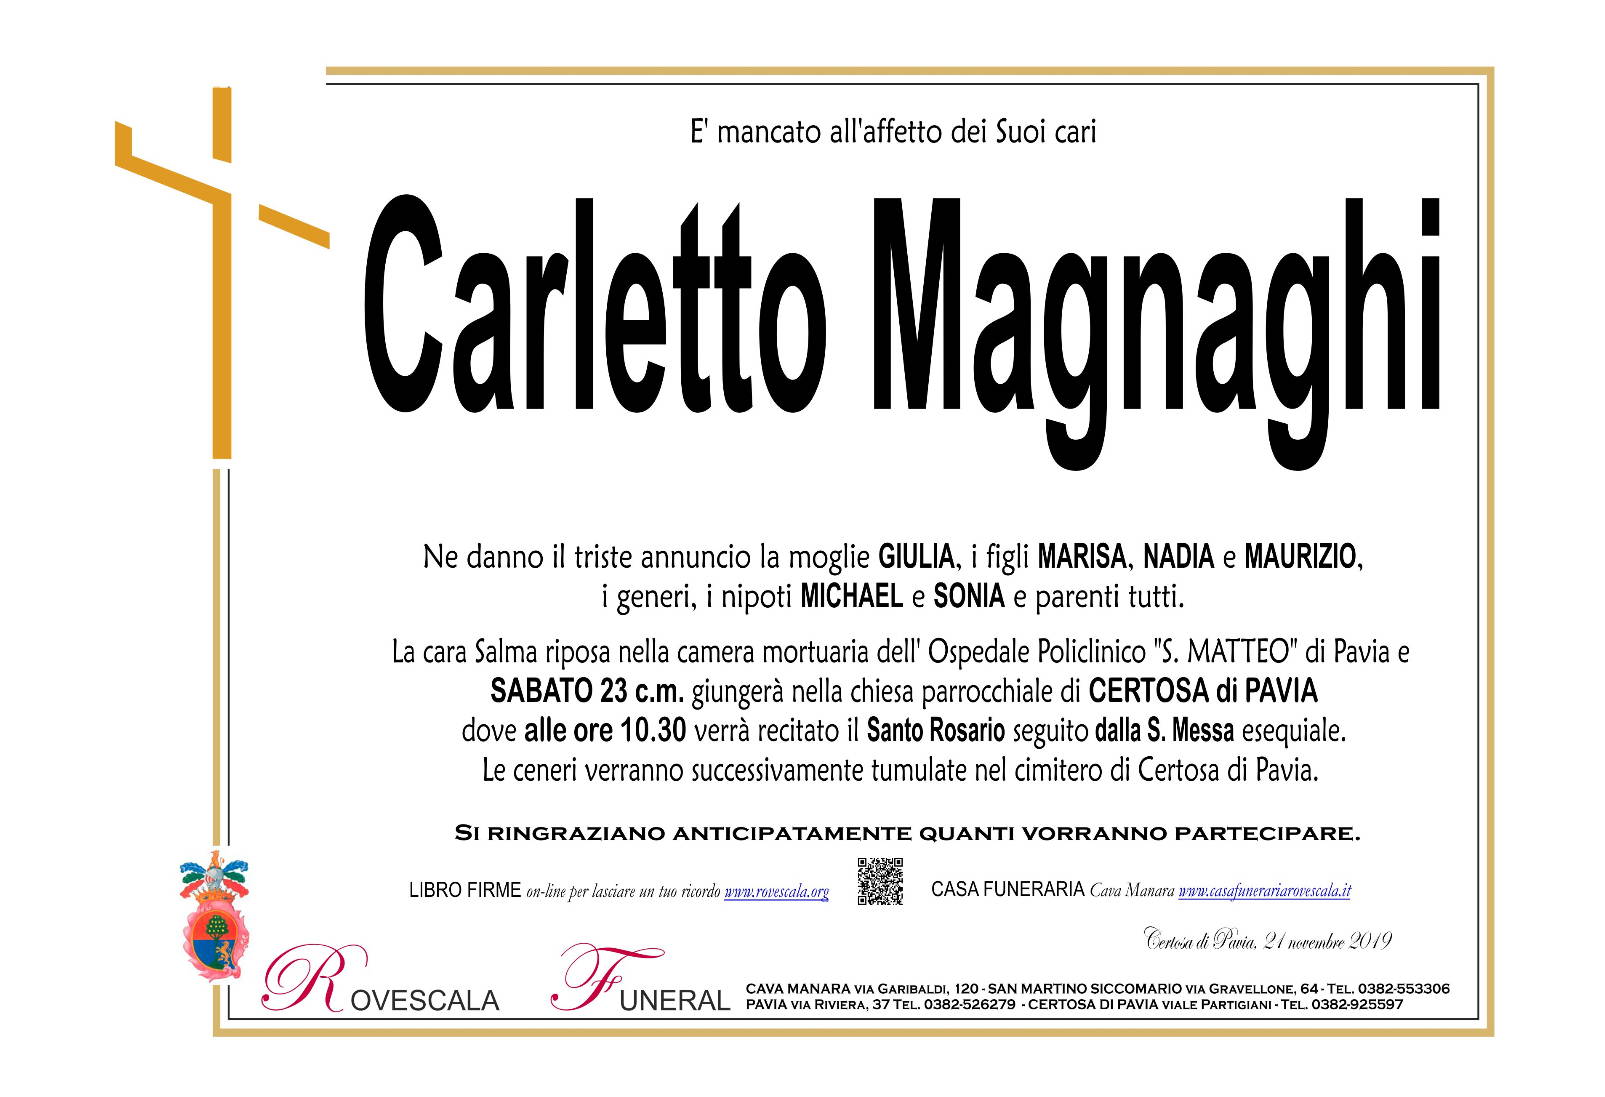 Carletto Magnaghi